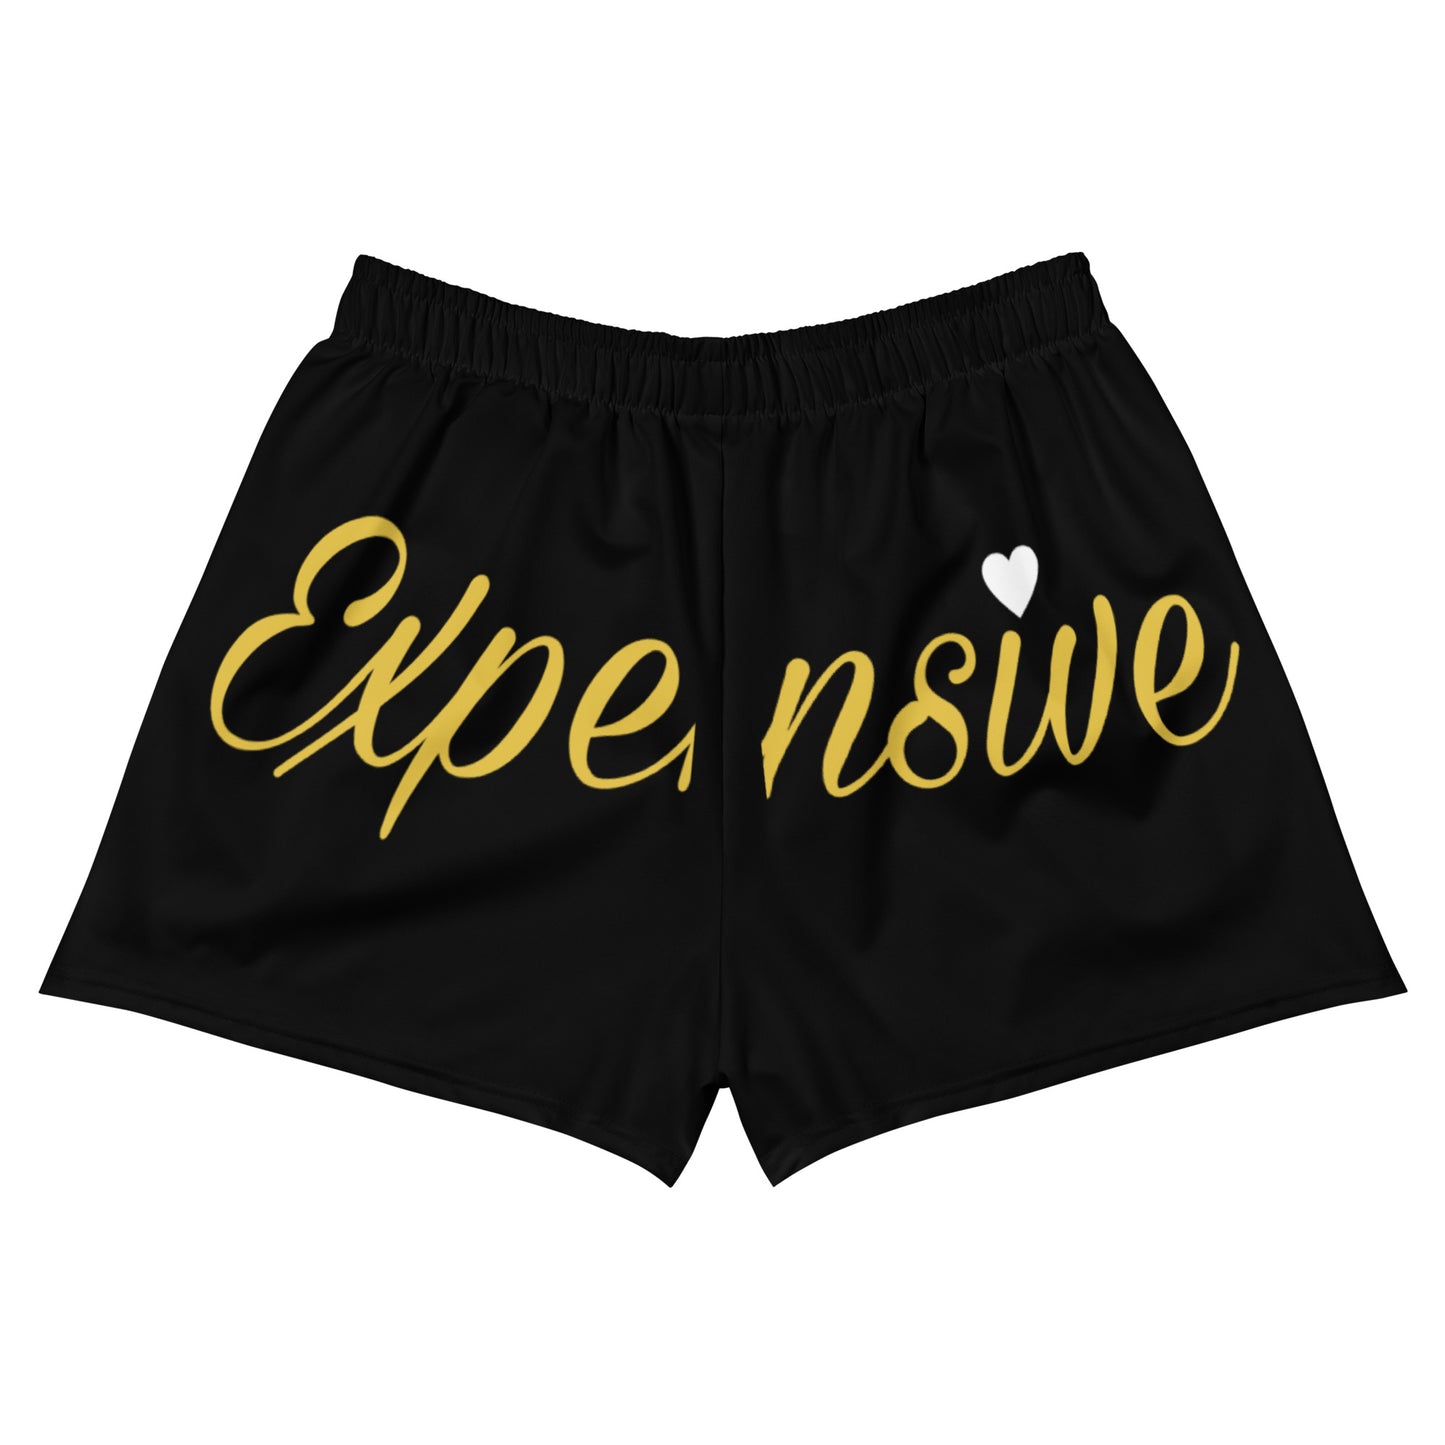 Ladies Expensive Athletic Shorts